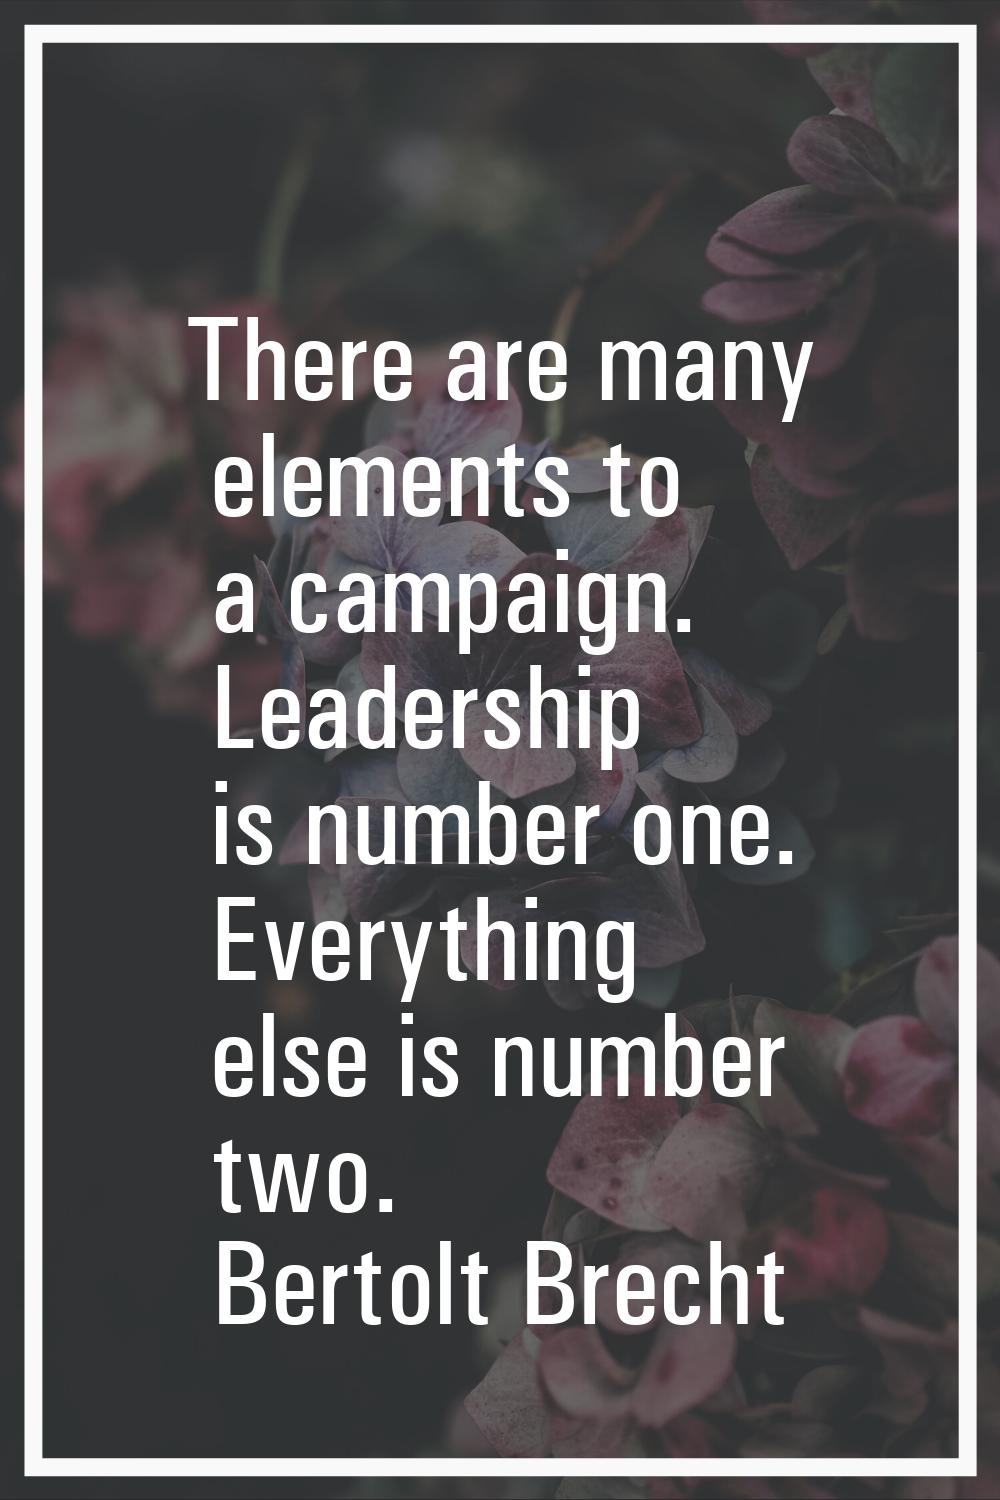 There are many elements to a campaign. Leadership is number one. Everything else is number two.